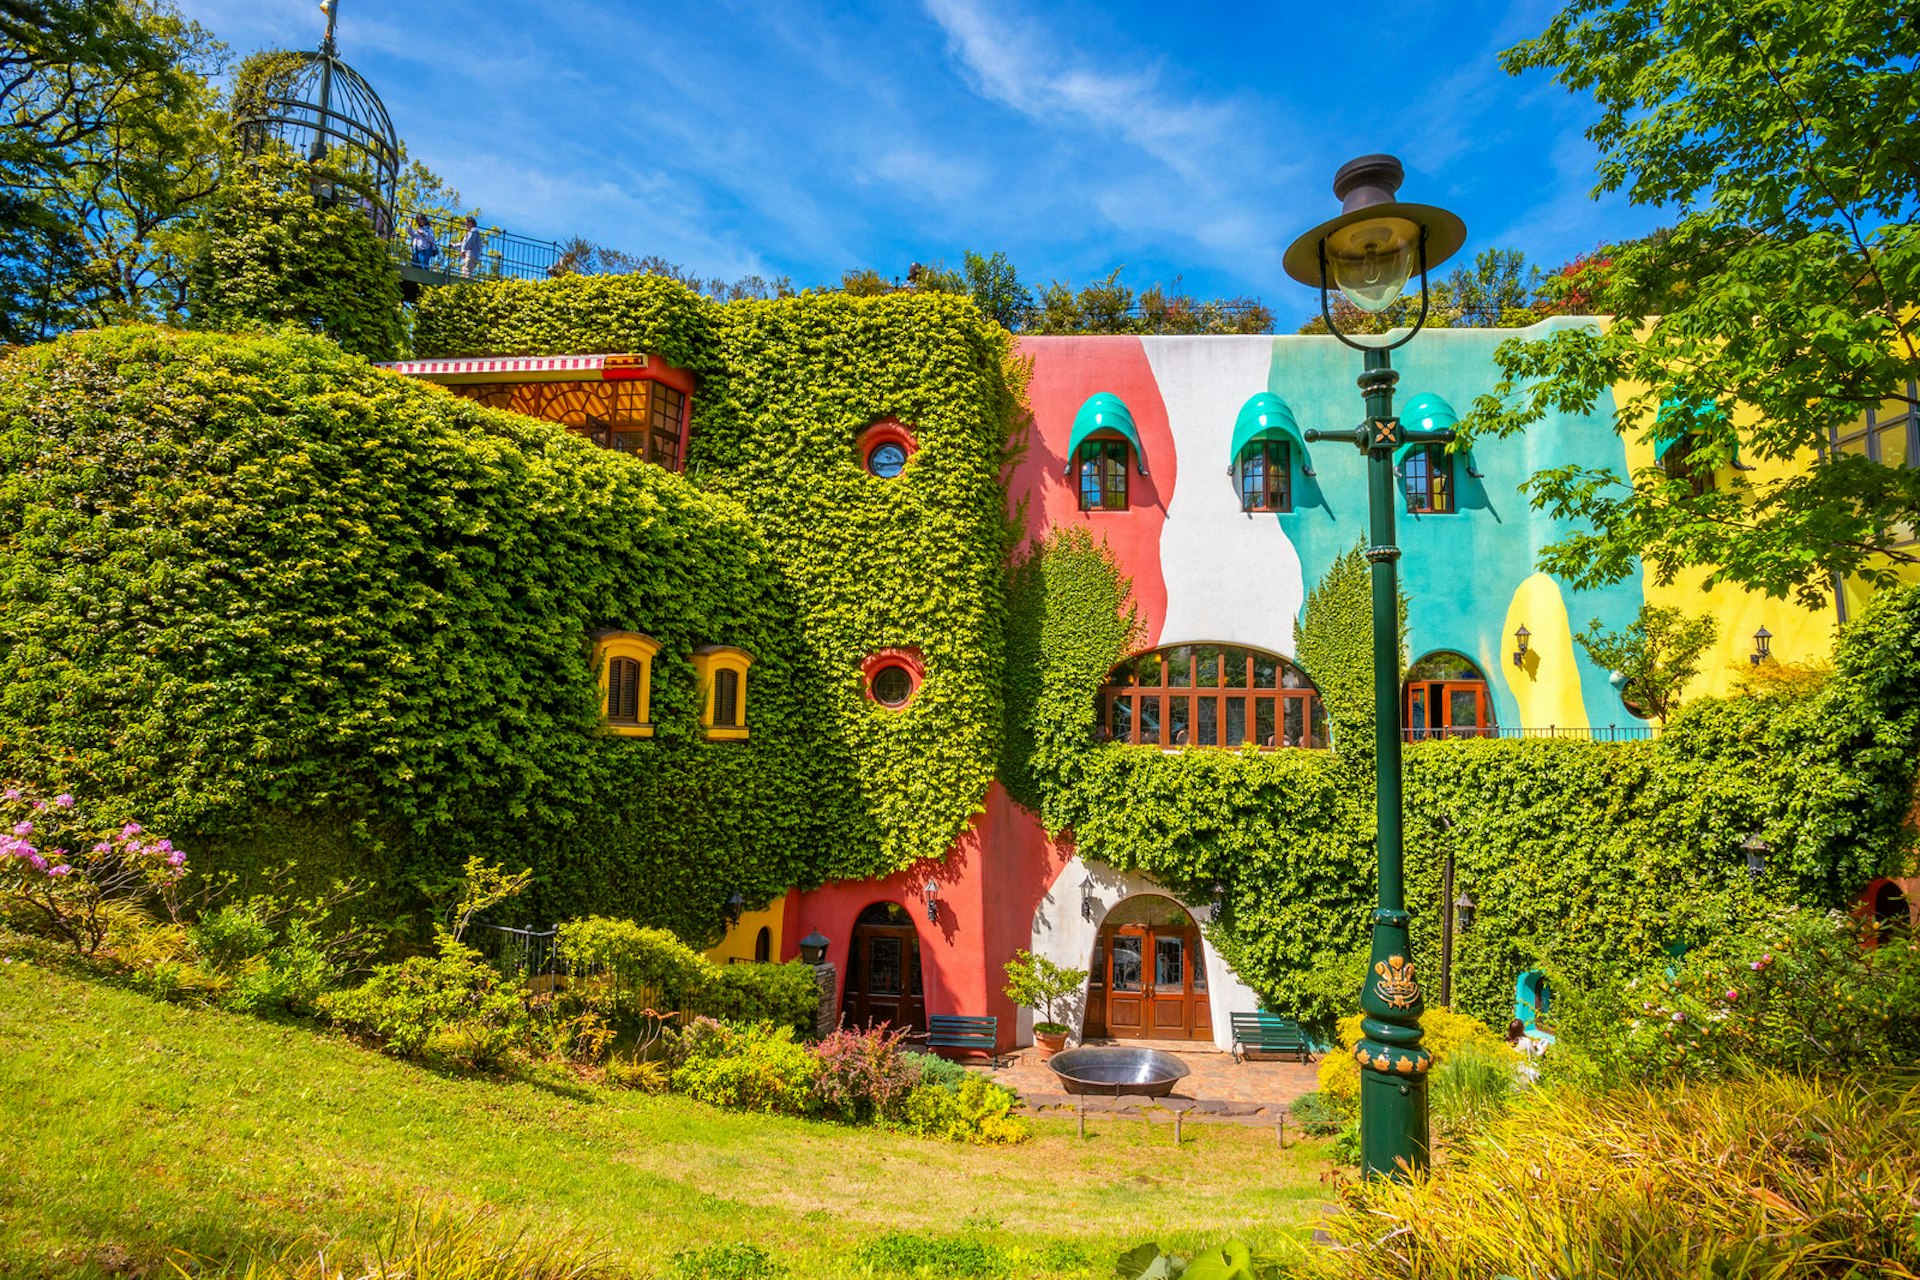 The foliage-clad, brightly coloured exterior of the Ghibli Museum in Tokyo